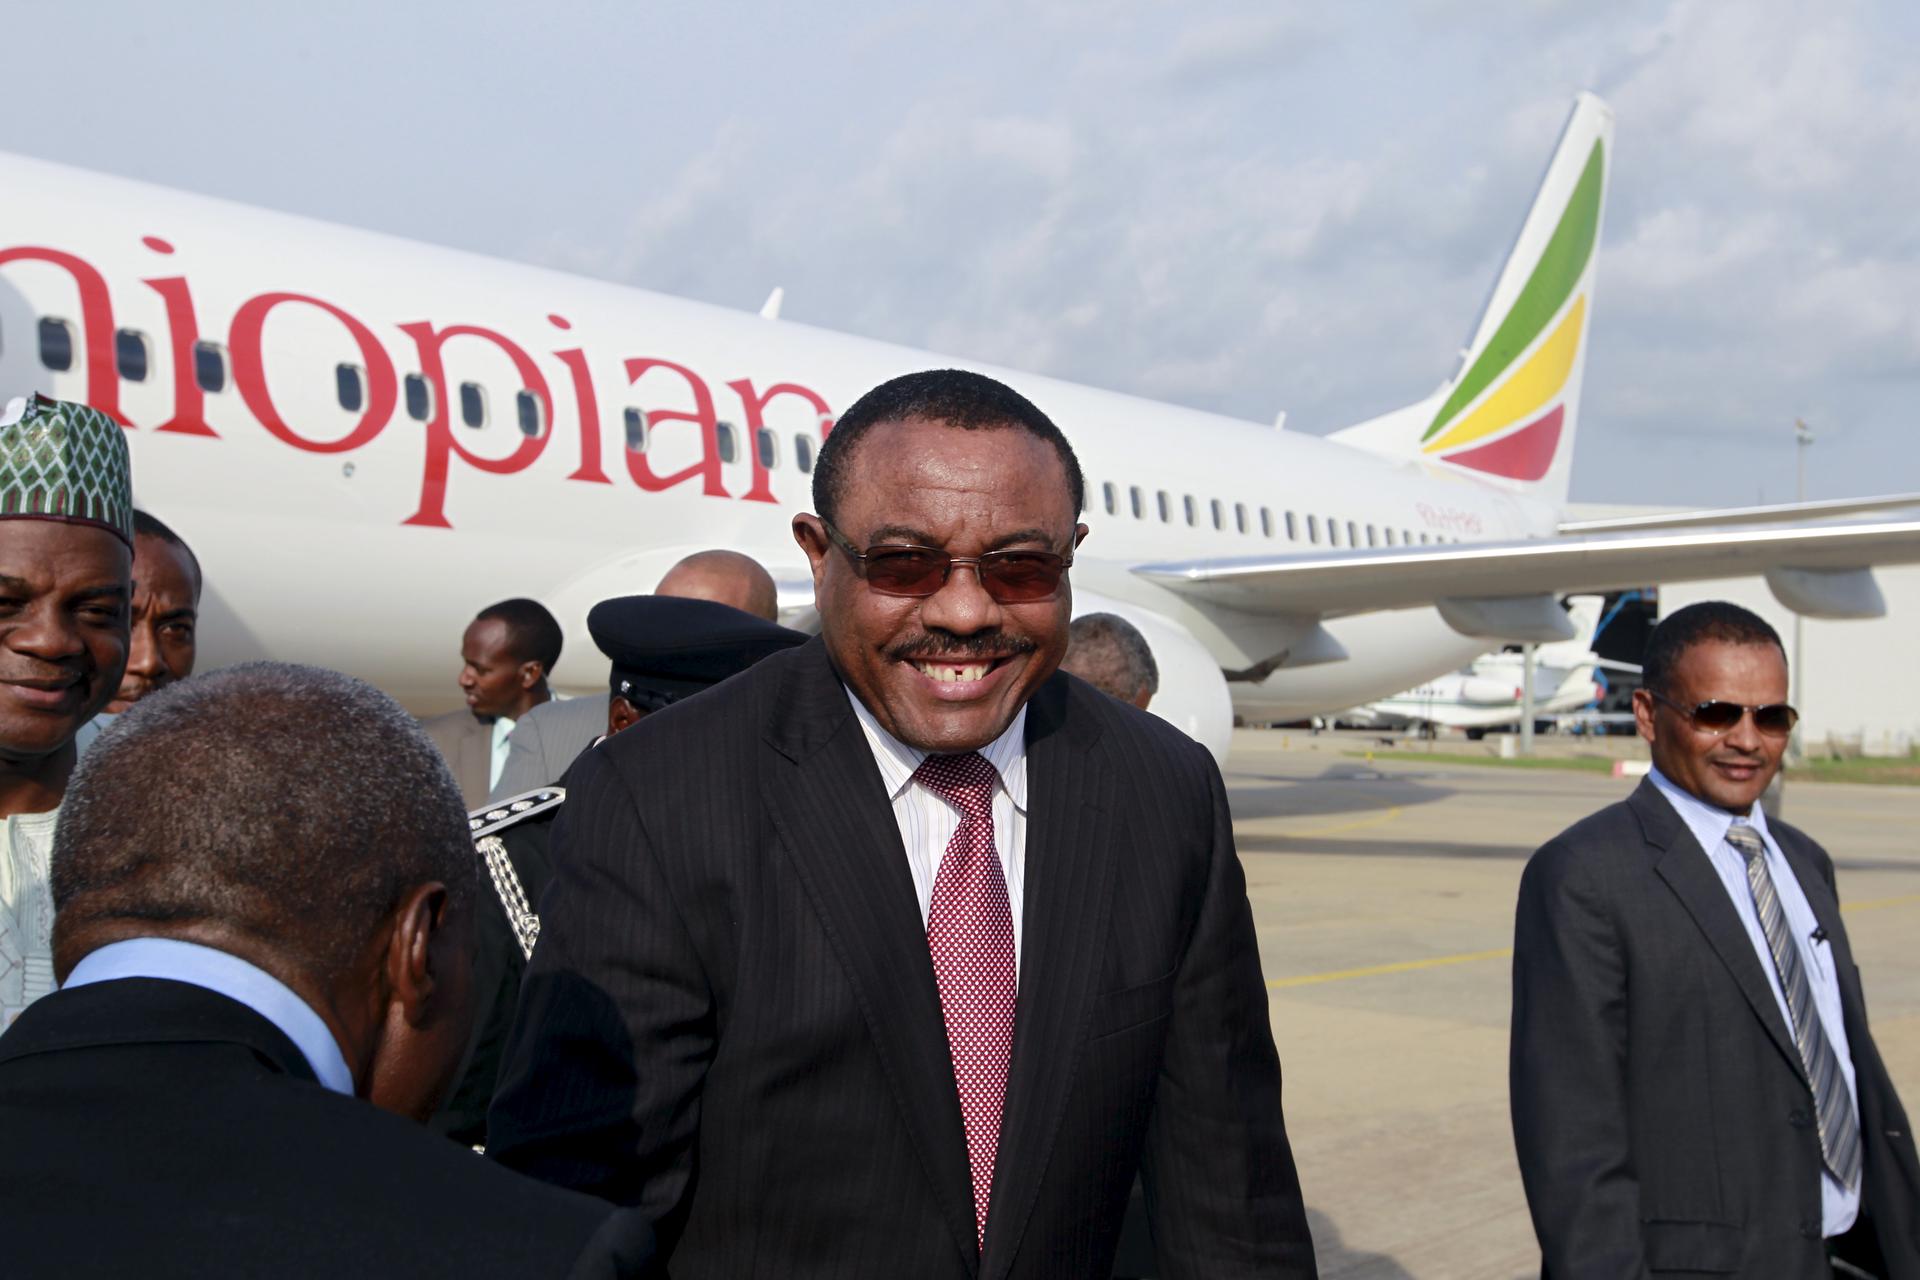 Ethiopia's Prime Minsiter Hailemariam Desalegn arrives at the presidential airport in Abuja, Nigeria May 28, 2015. What's he up to?